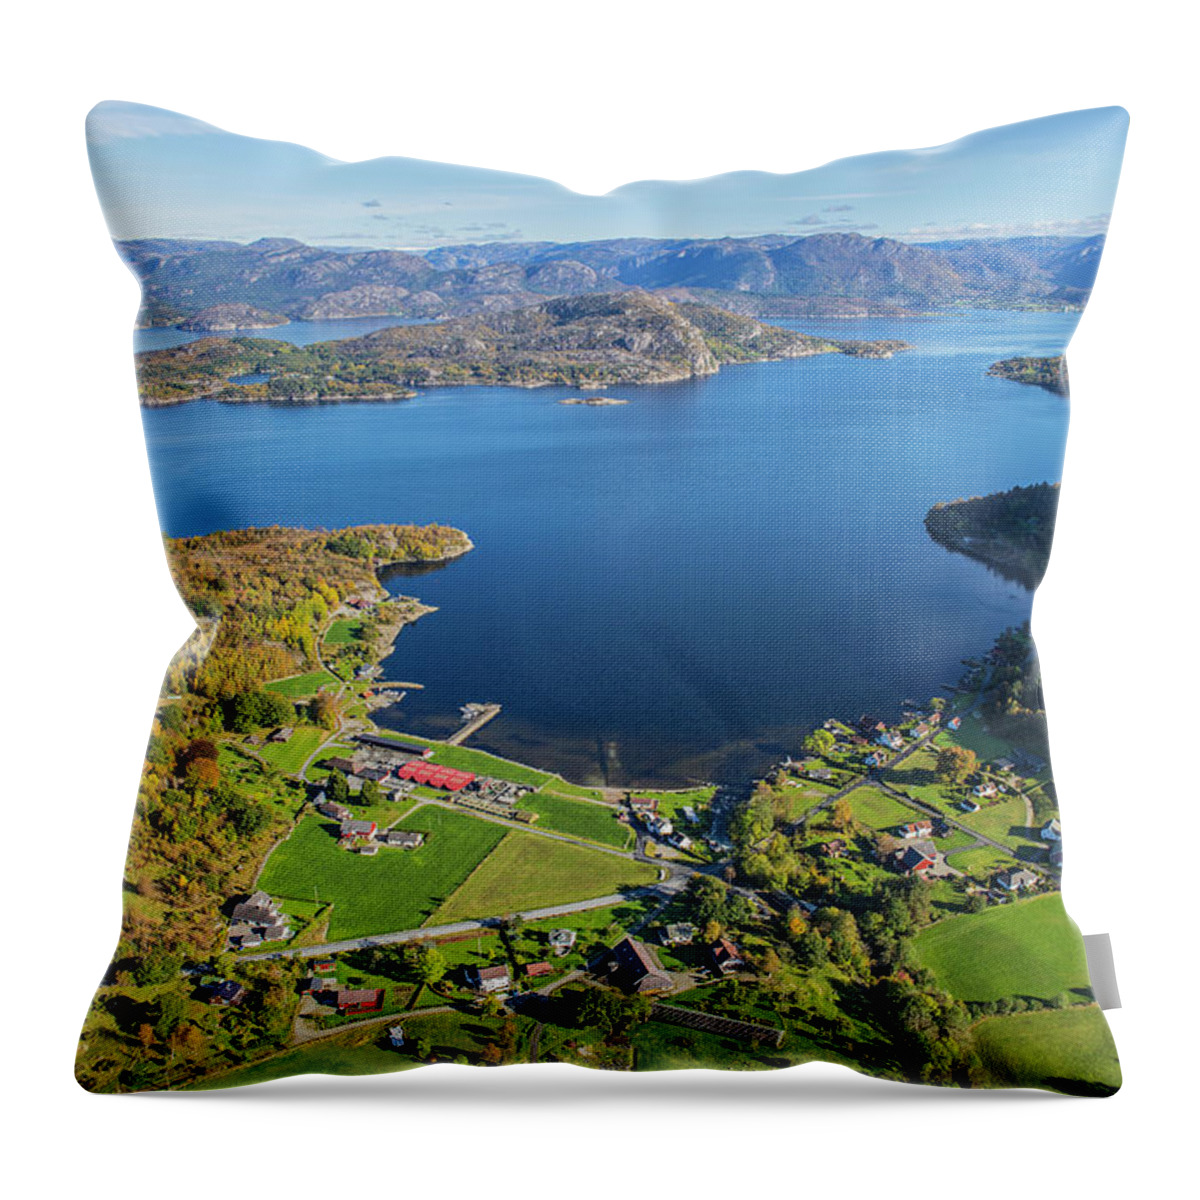 Scenics Throw Pillow featuring the photograph Small Community In The Fjords by Sindre Ellingsen